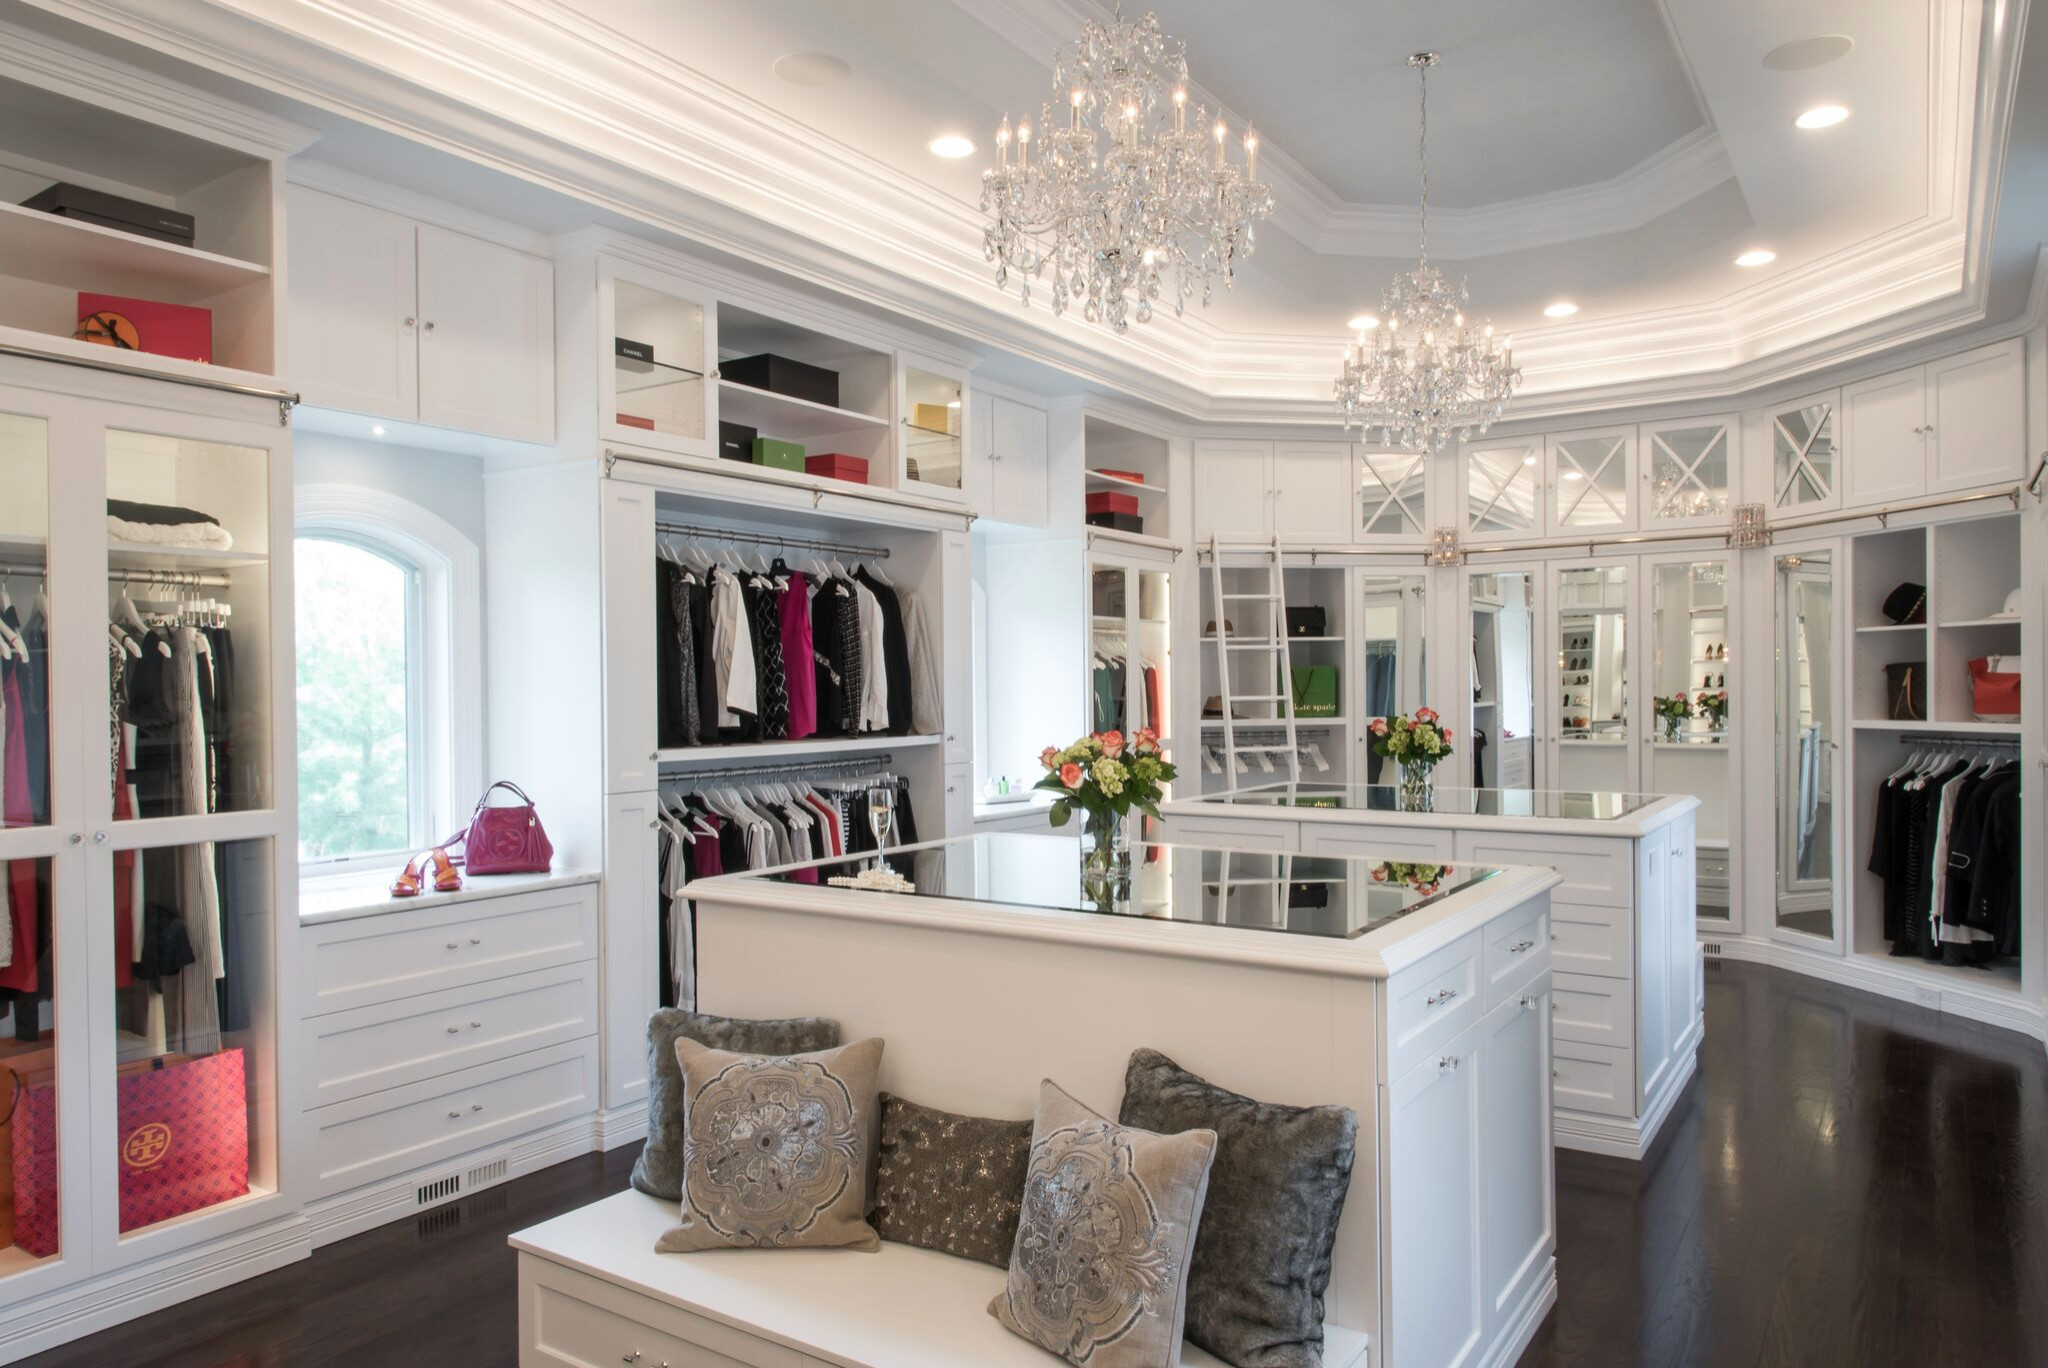 40 Incredible Walk-In Wardrobes for Women (Photos)  Luxury closets design,  Walk in closet design, Closet remodel